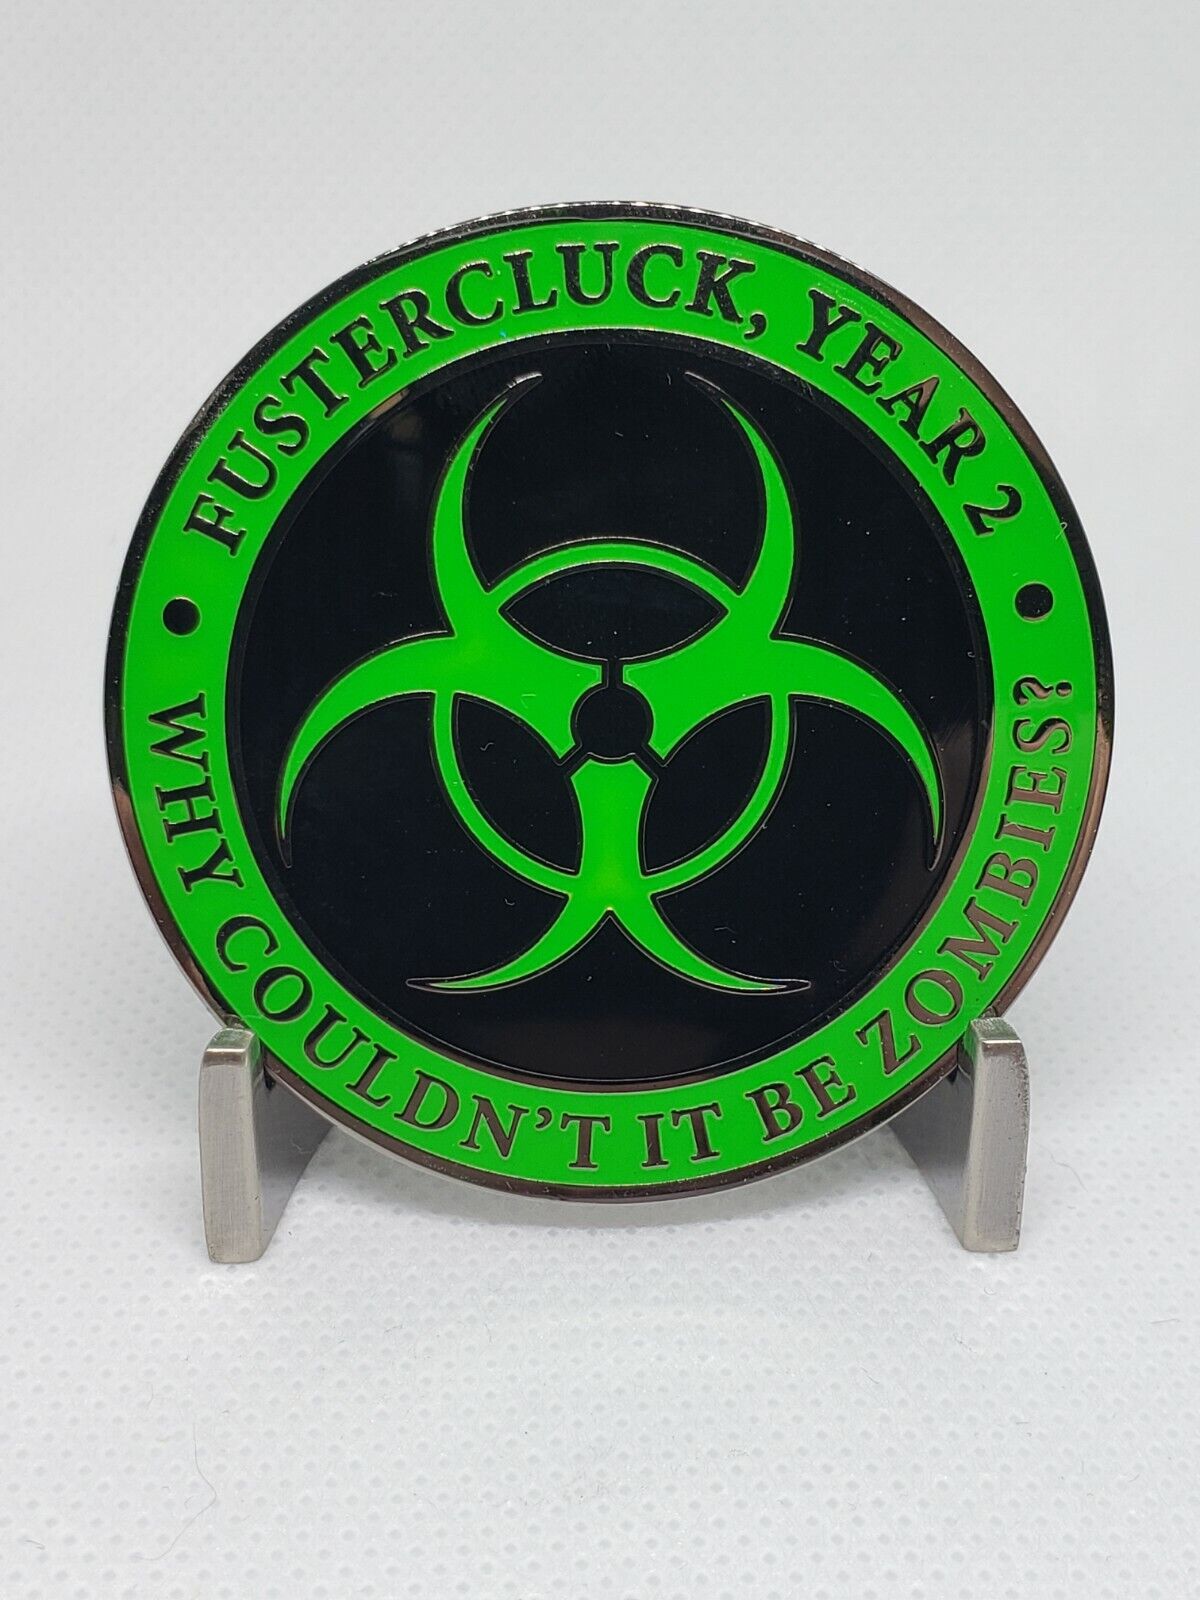 QTY 10 - 2021 GLOWING Operation Global FUBAR Challenge Coin fustercluck zombies